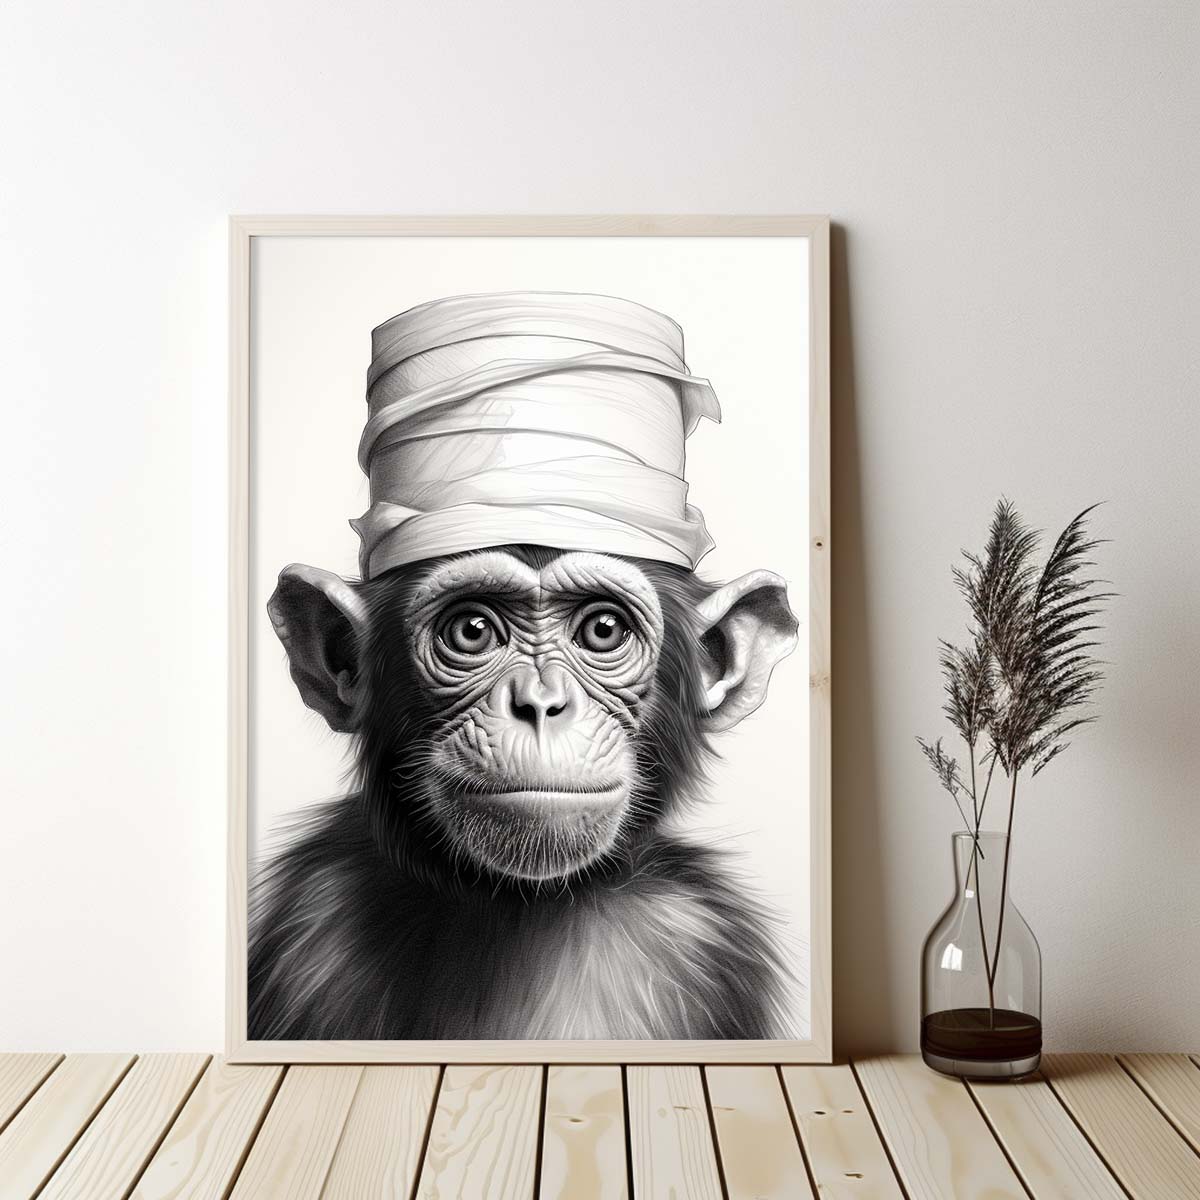 Cute Monkey With Toilet Paper, Canvas Or Poster, Funny Monkey Art, Bathroom Wall Decor, Home Decor, Bathroom Wall Art, Monkey Wall Decor, Animal Decor, Animal Gift, Animal Illustration, Digital Download